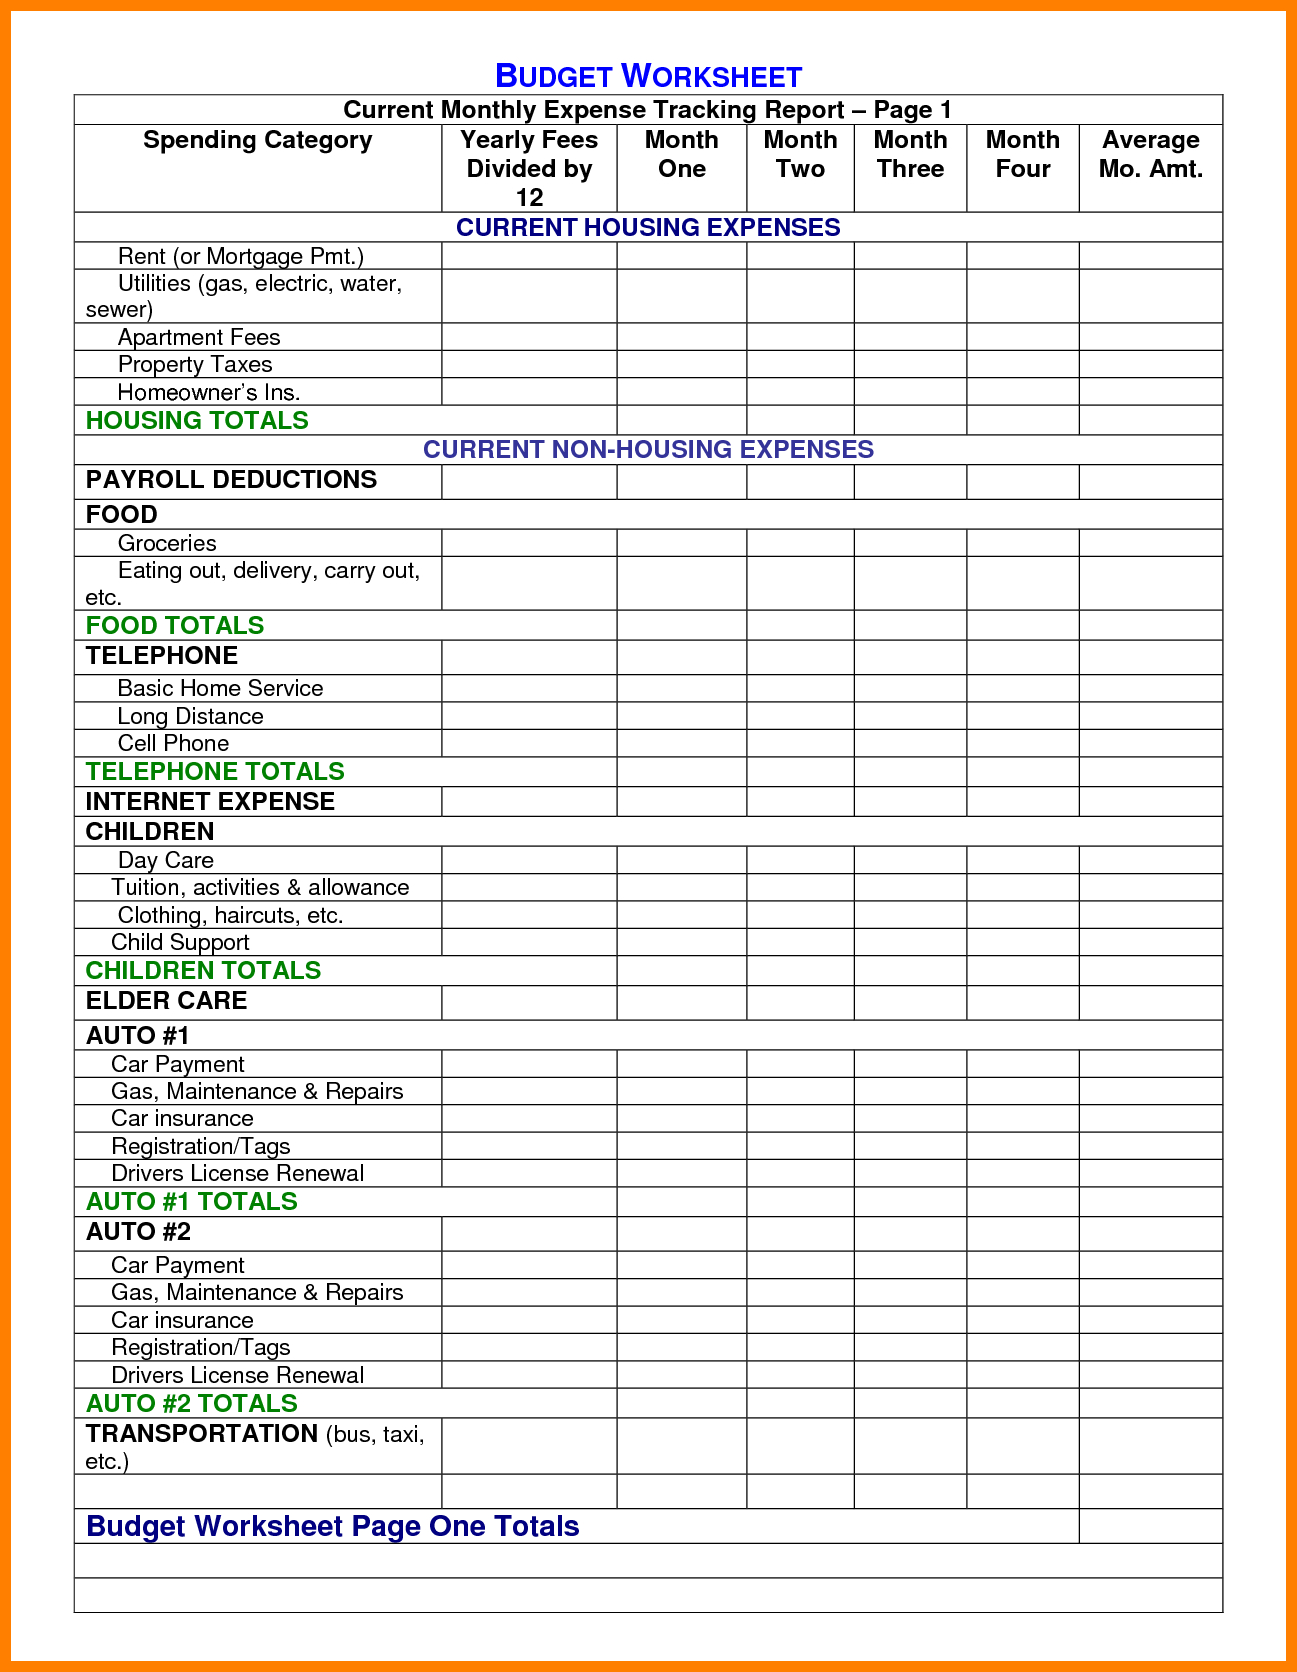 Construction Expenses Spreadsheet inside Accounting For Rental Property Spreadsheet And Construction Expenses